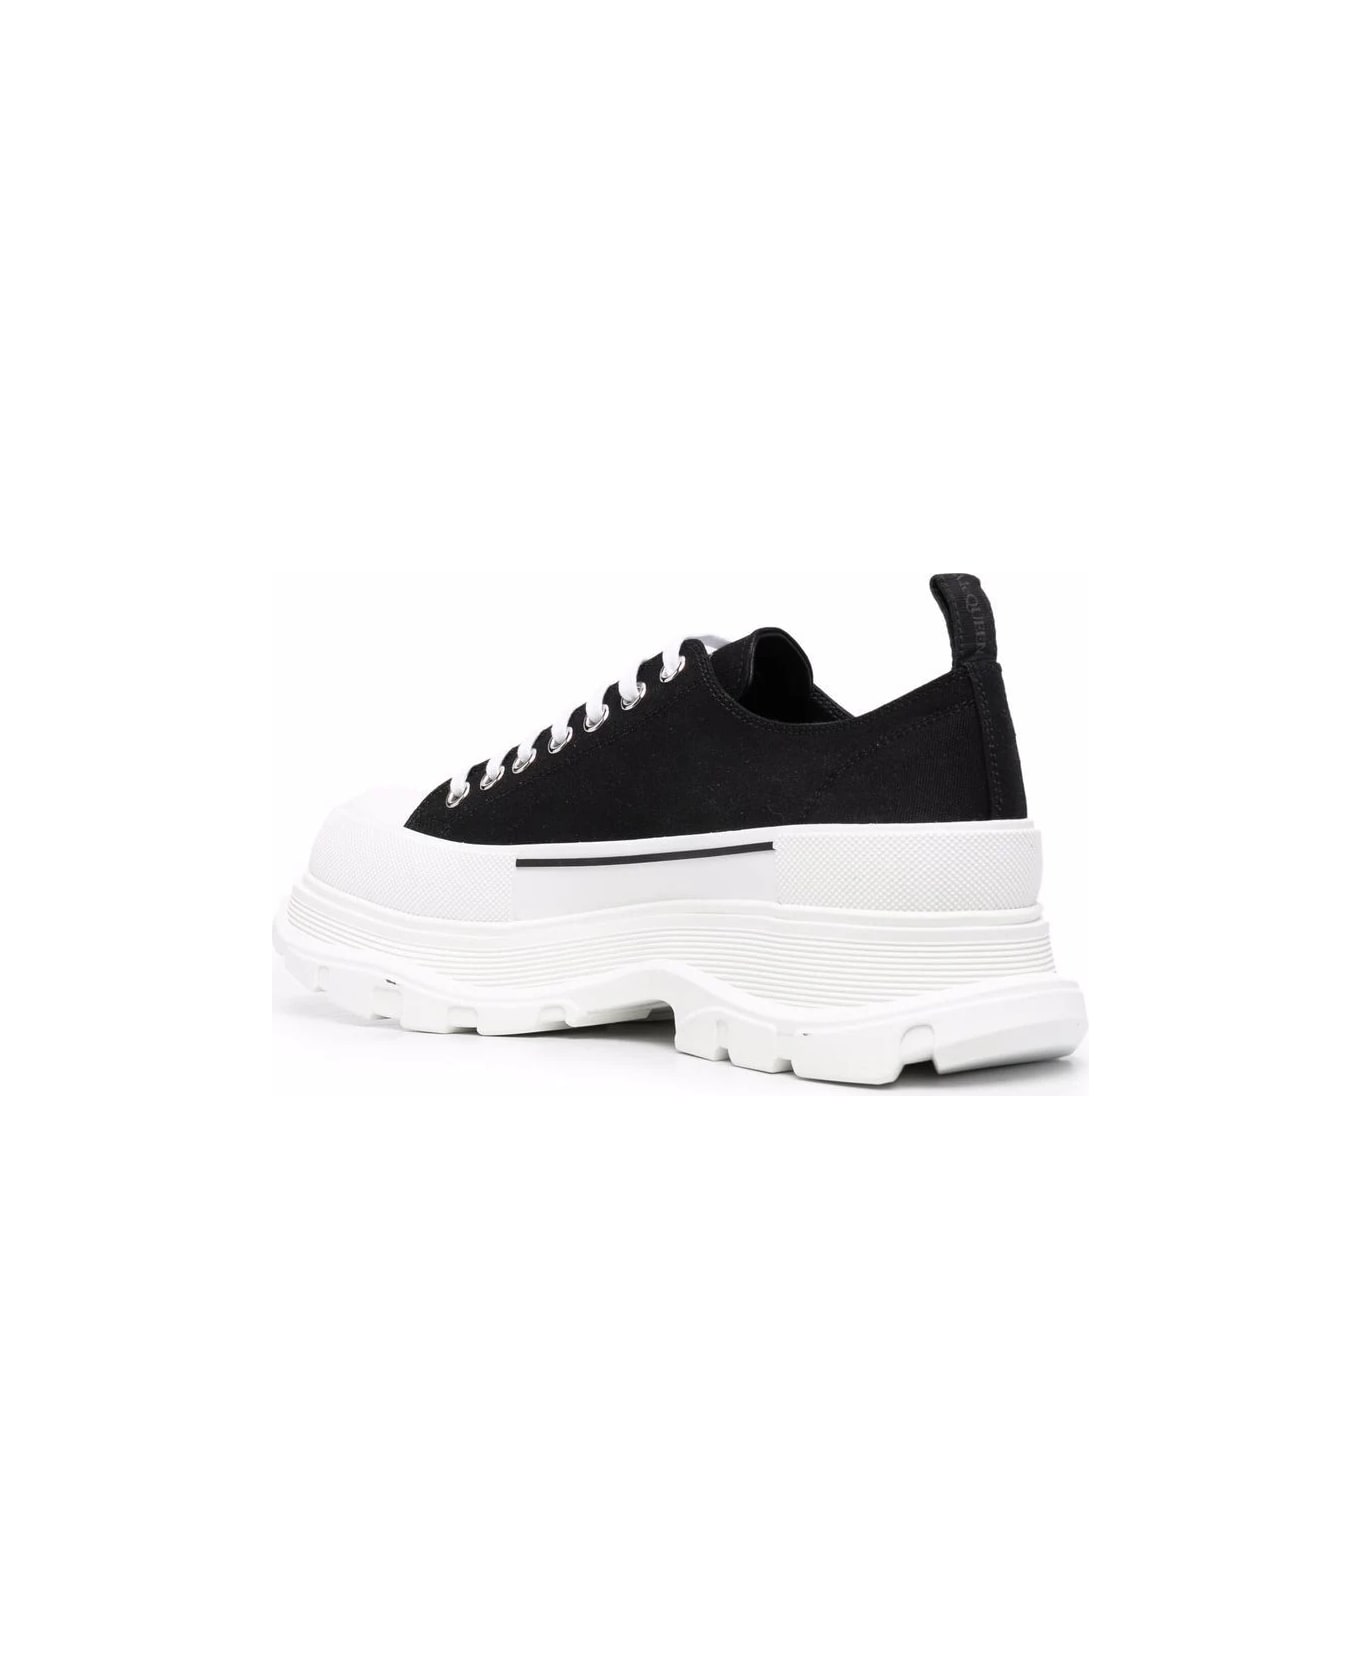 Alexander McQueen Tread Slick Lace Up Shoes In Black And White - Black